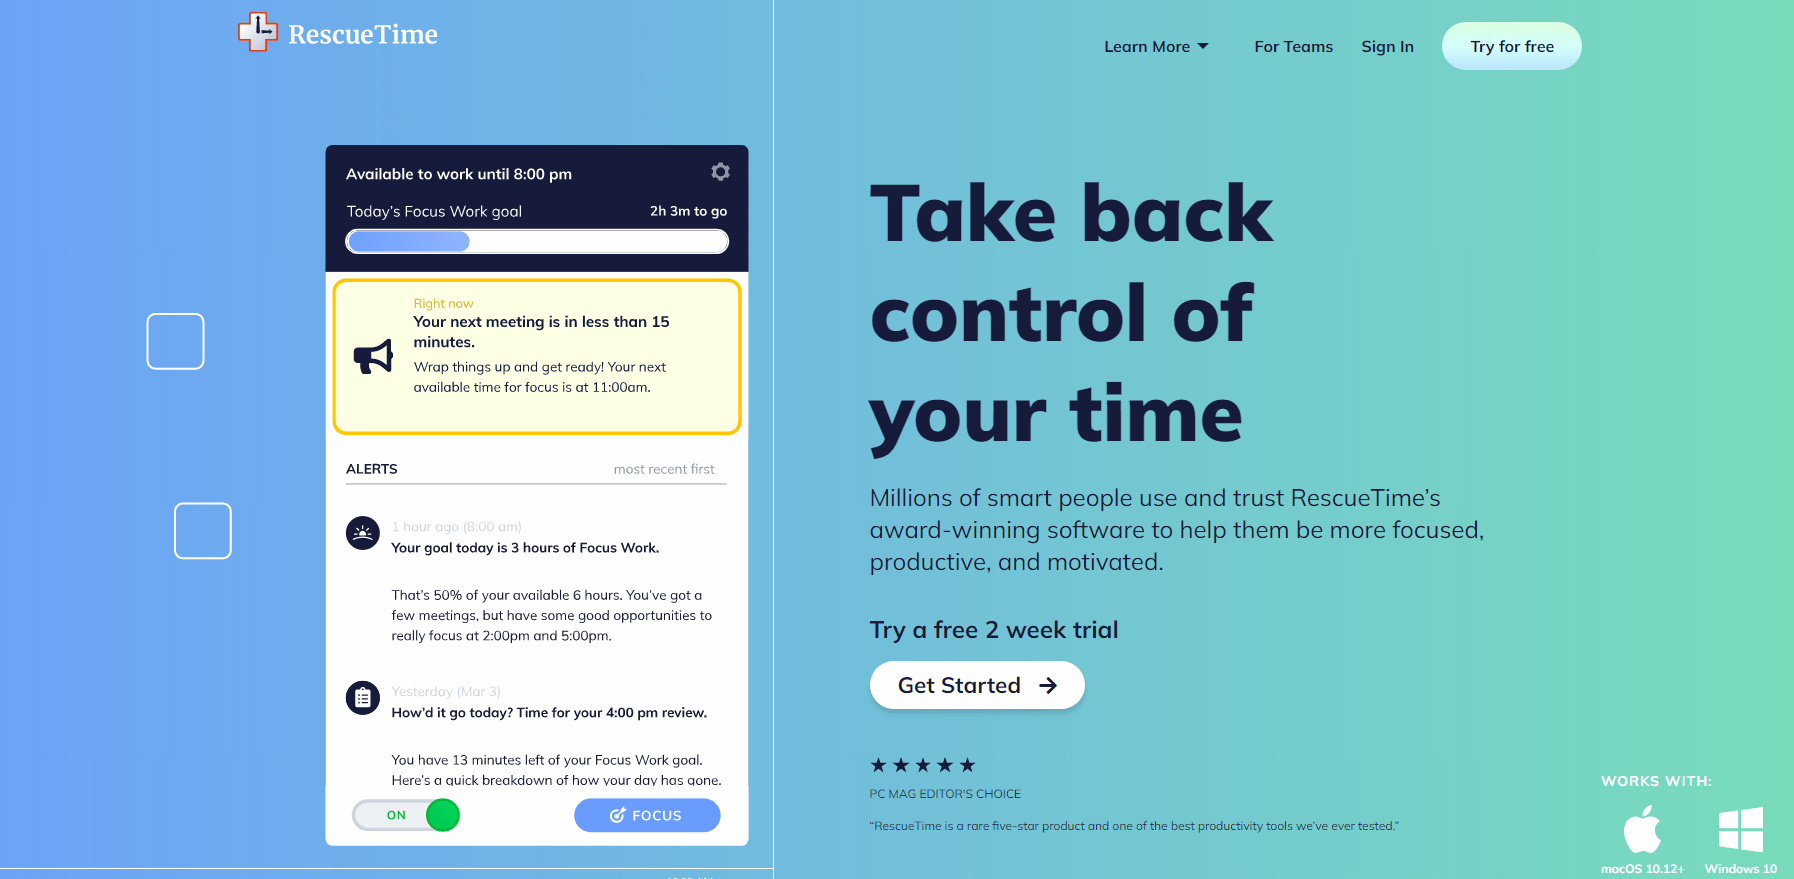 RescueTime homepage with Getting started options